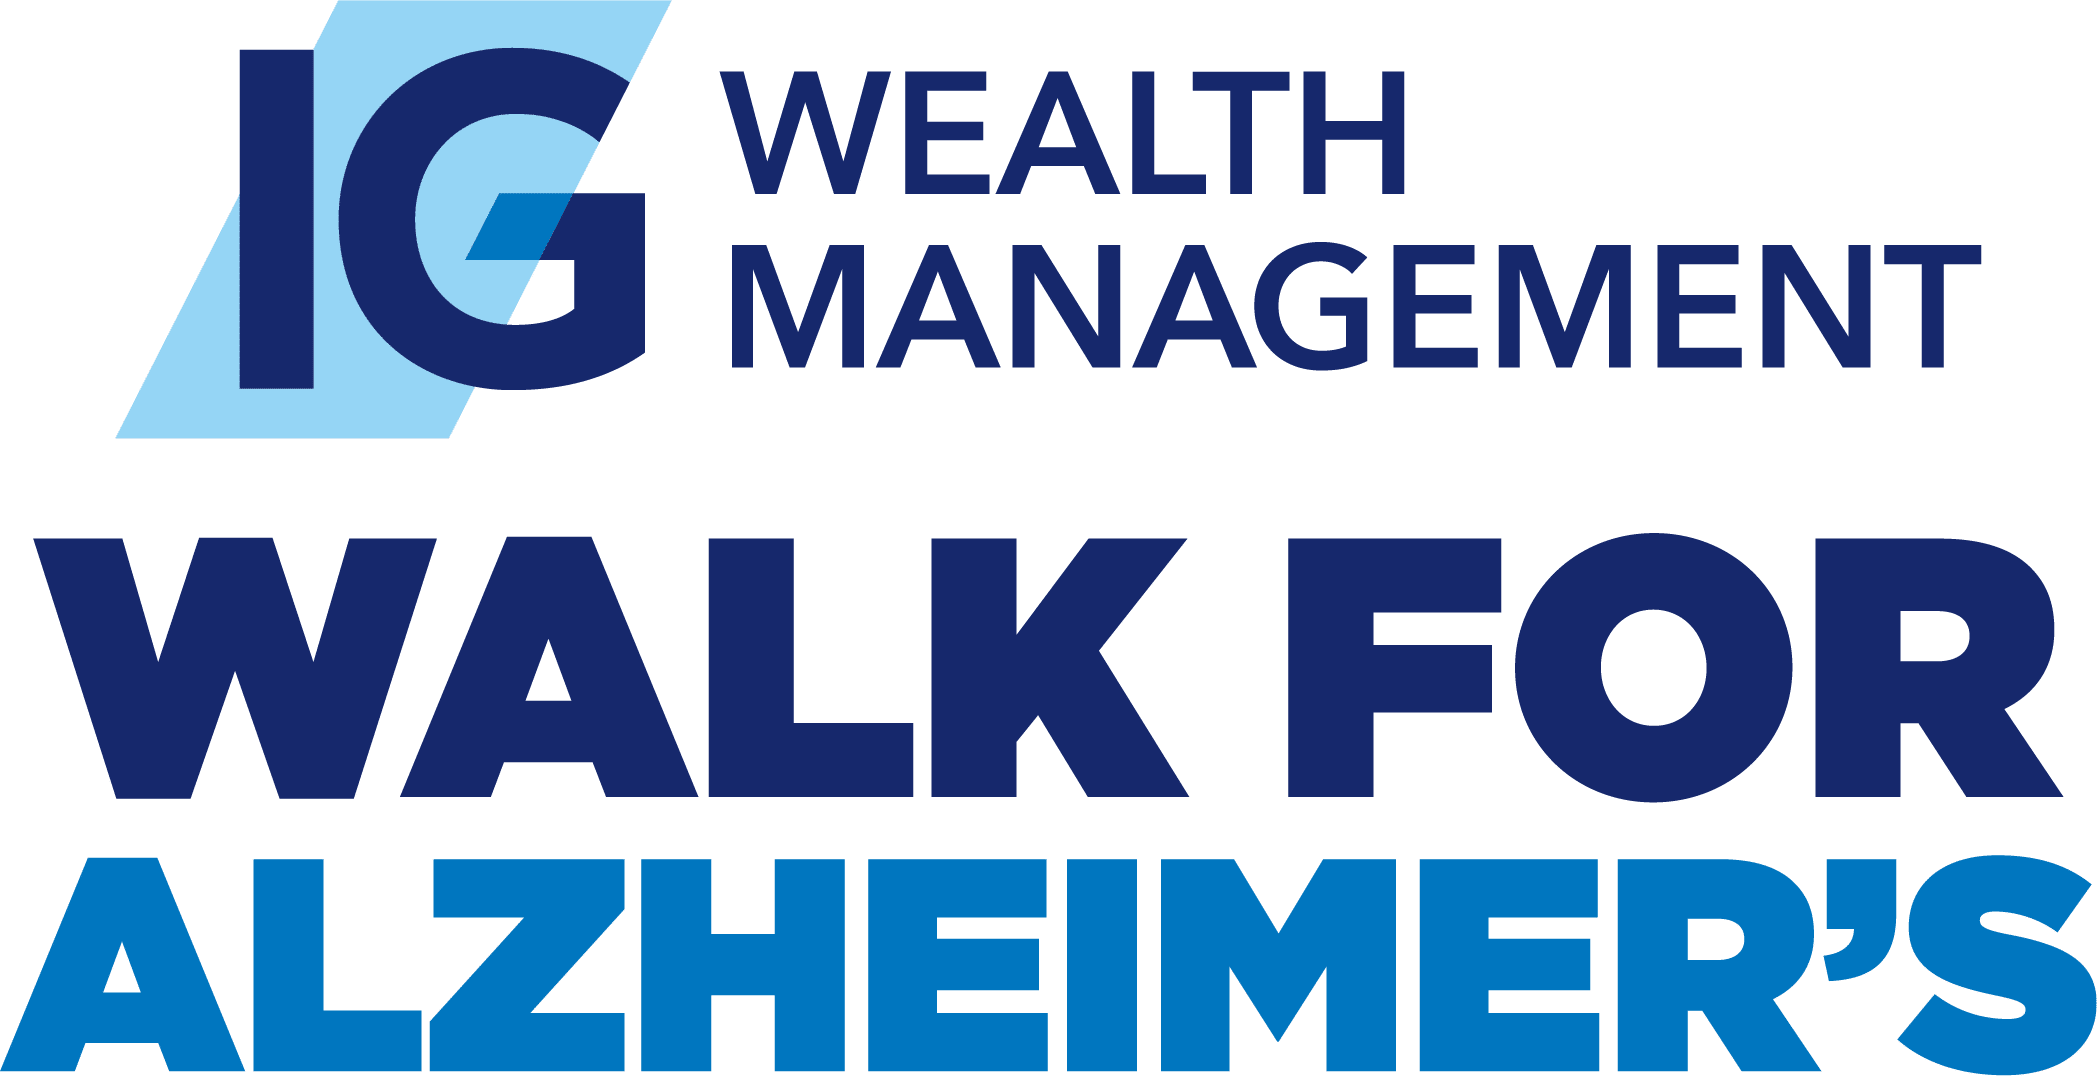 Logo of IG Wealth Management Walk for Alzheimer's event, featuring bold text on a blue gradient background.